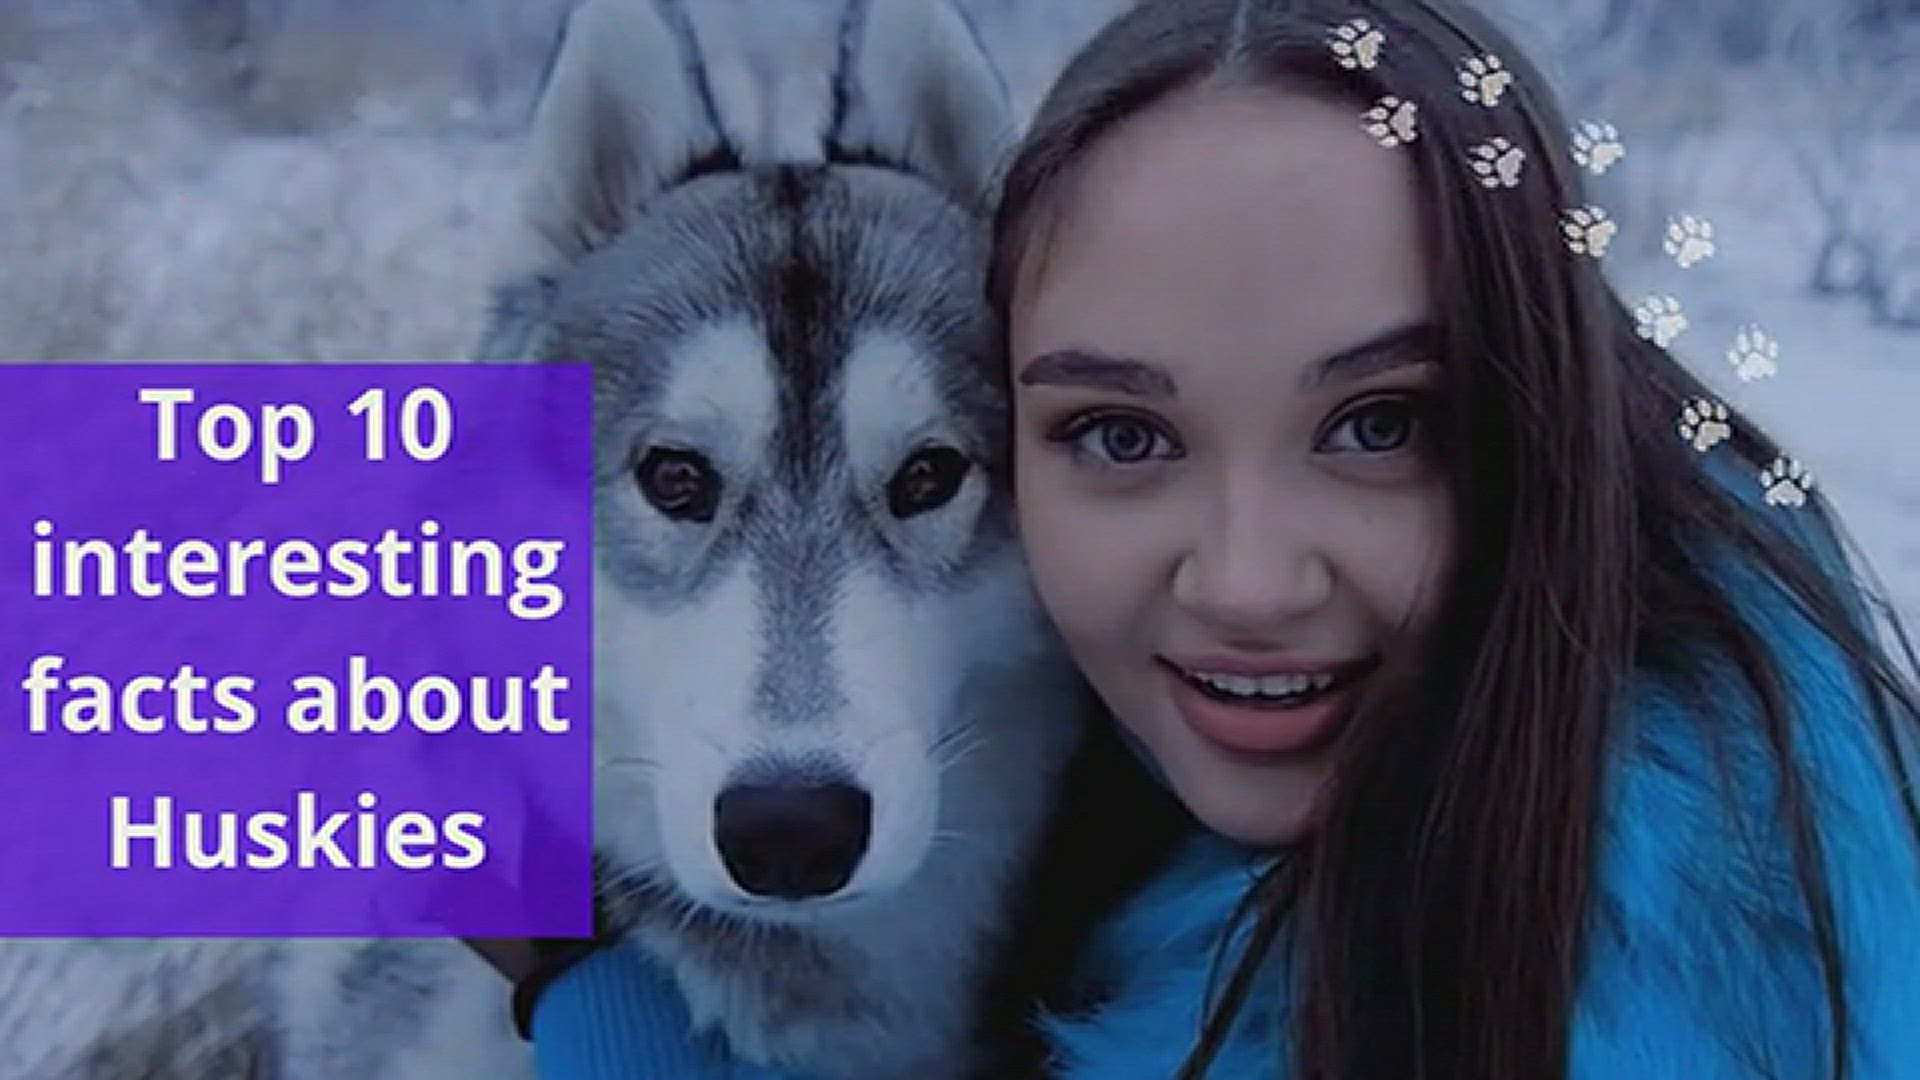 'Video thumbnail for 10 interesting facts about Huskies '